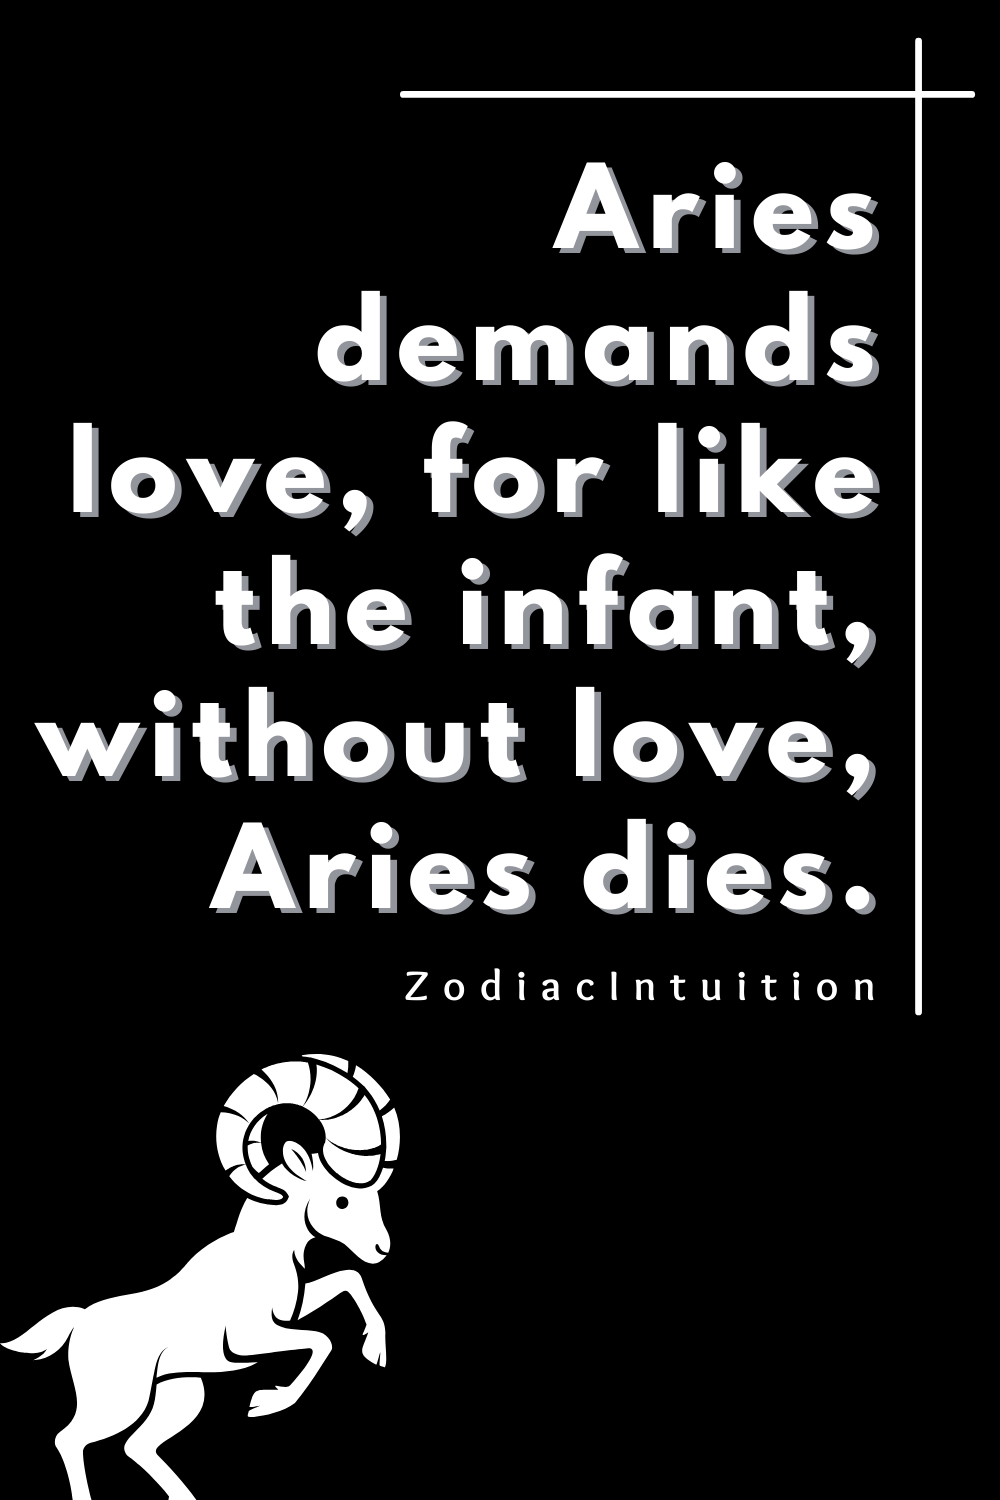 Aries demands love, for like the infant, without love, Aries dies.